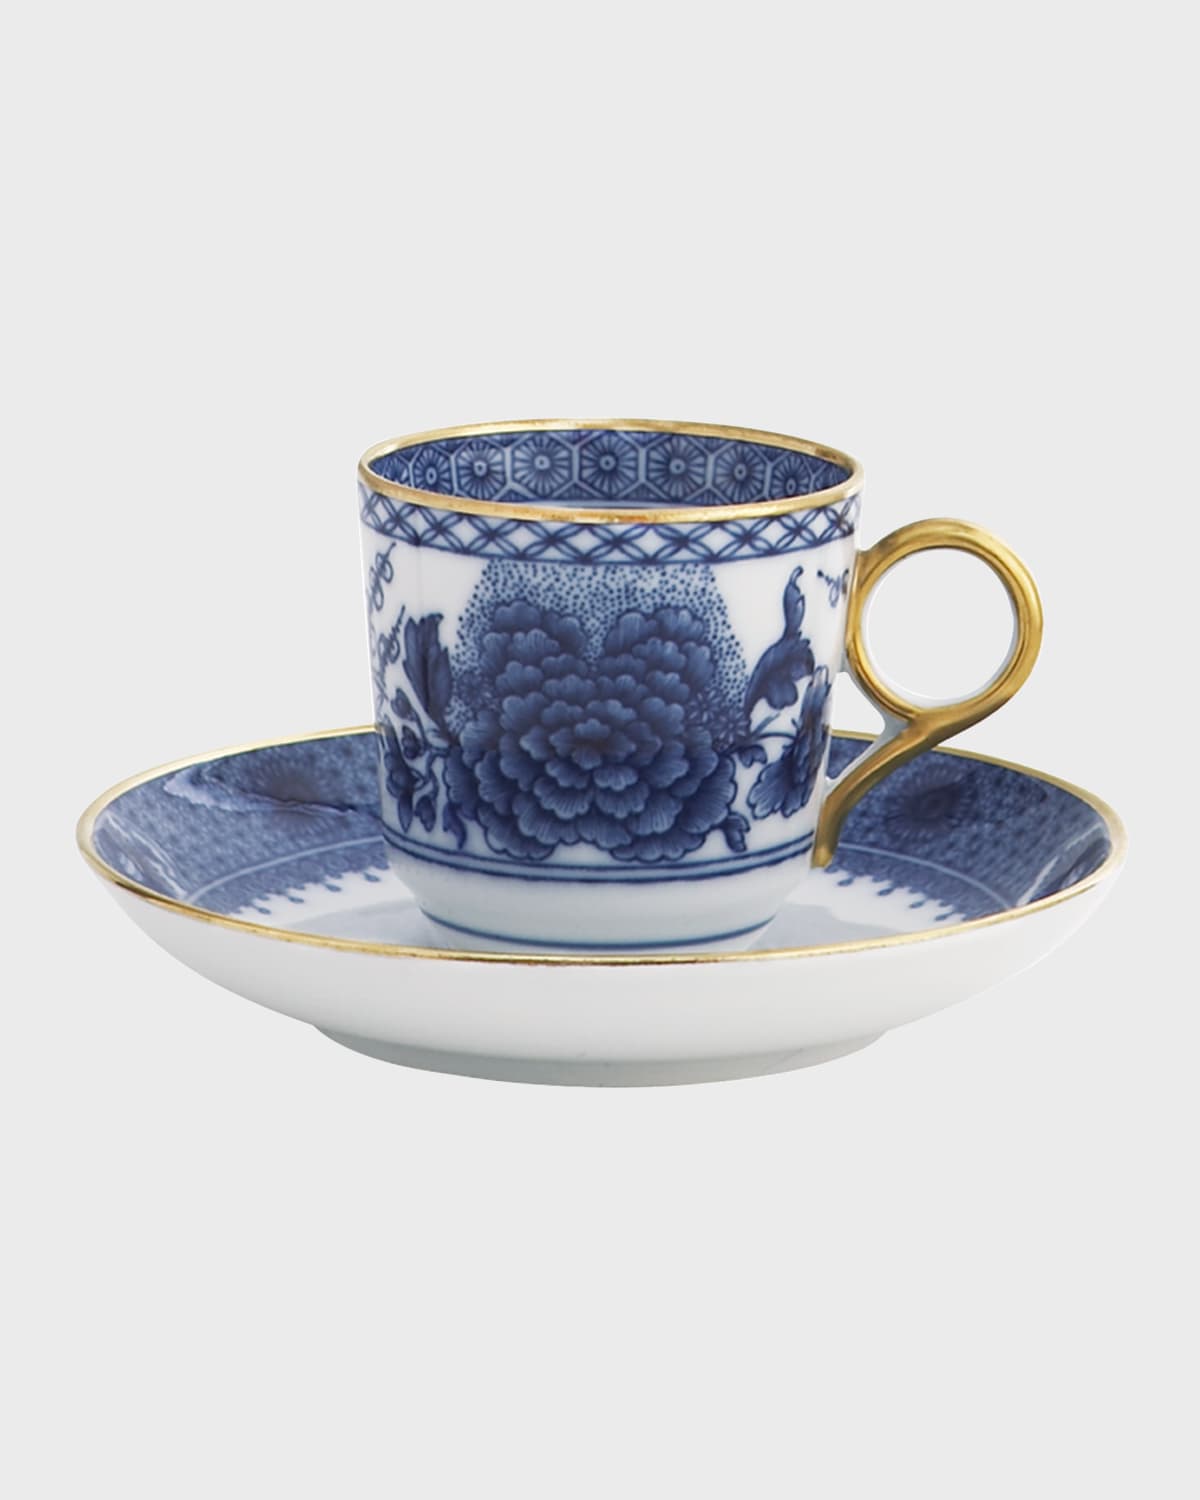 MOTTAHEDEH IMPERIAL BLUE DEMITASSE CUP & SAUCER PLATE